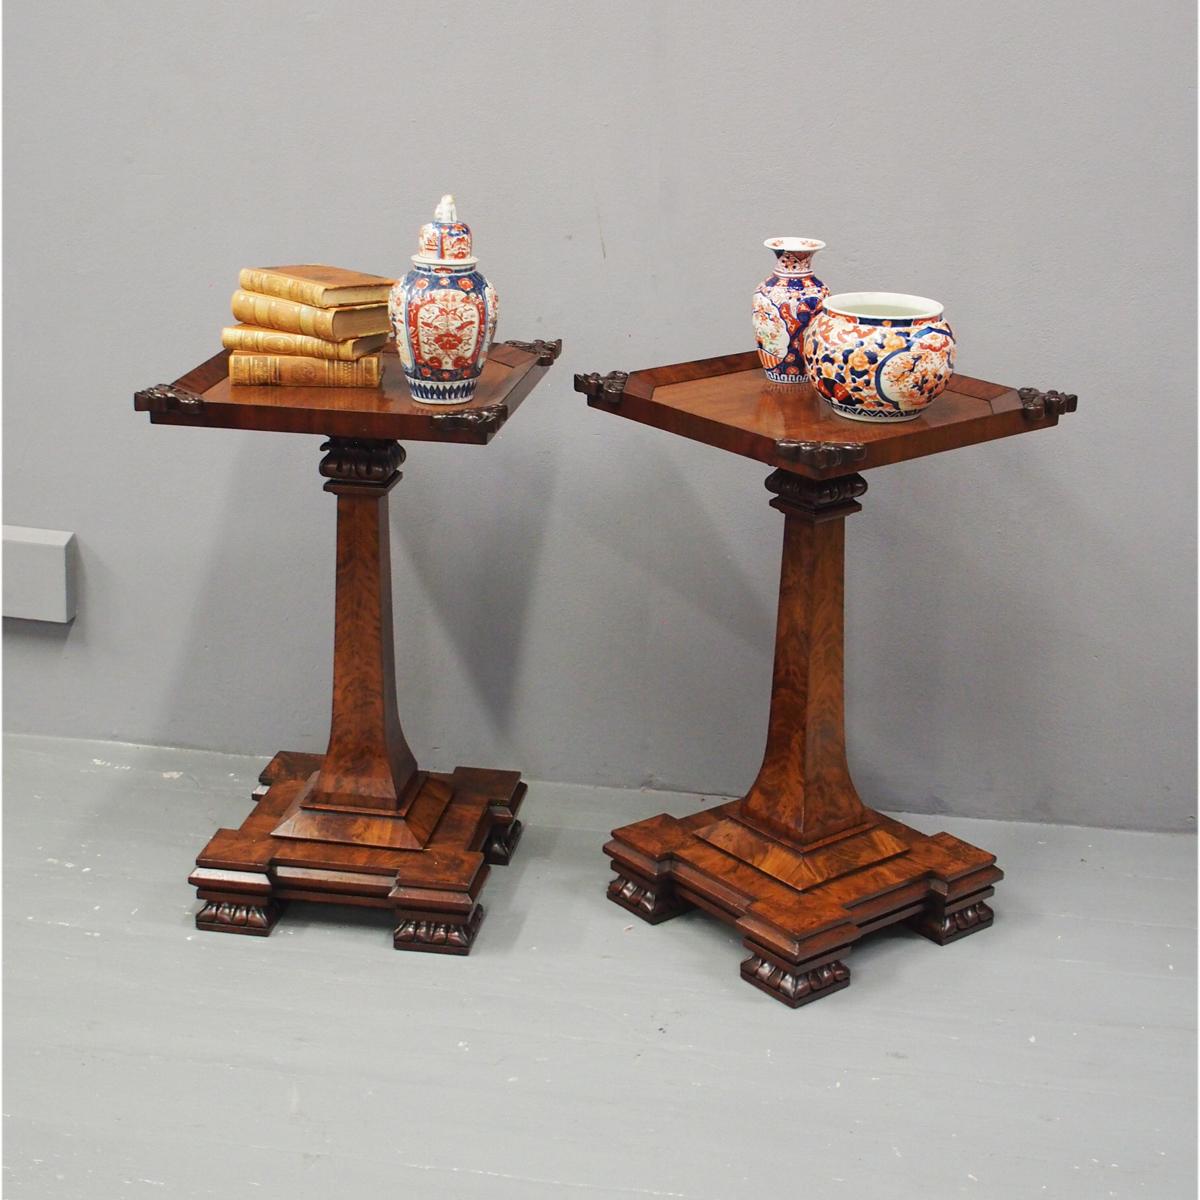 Rare pair of George IV flame mahogany occasional tables, with adaptations, circa 1825. With foliate carving to each corner of the top and a flat fore-edge, with a capital and carved flowers beneath it. There is a well figured mahogany block which